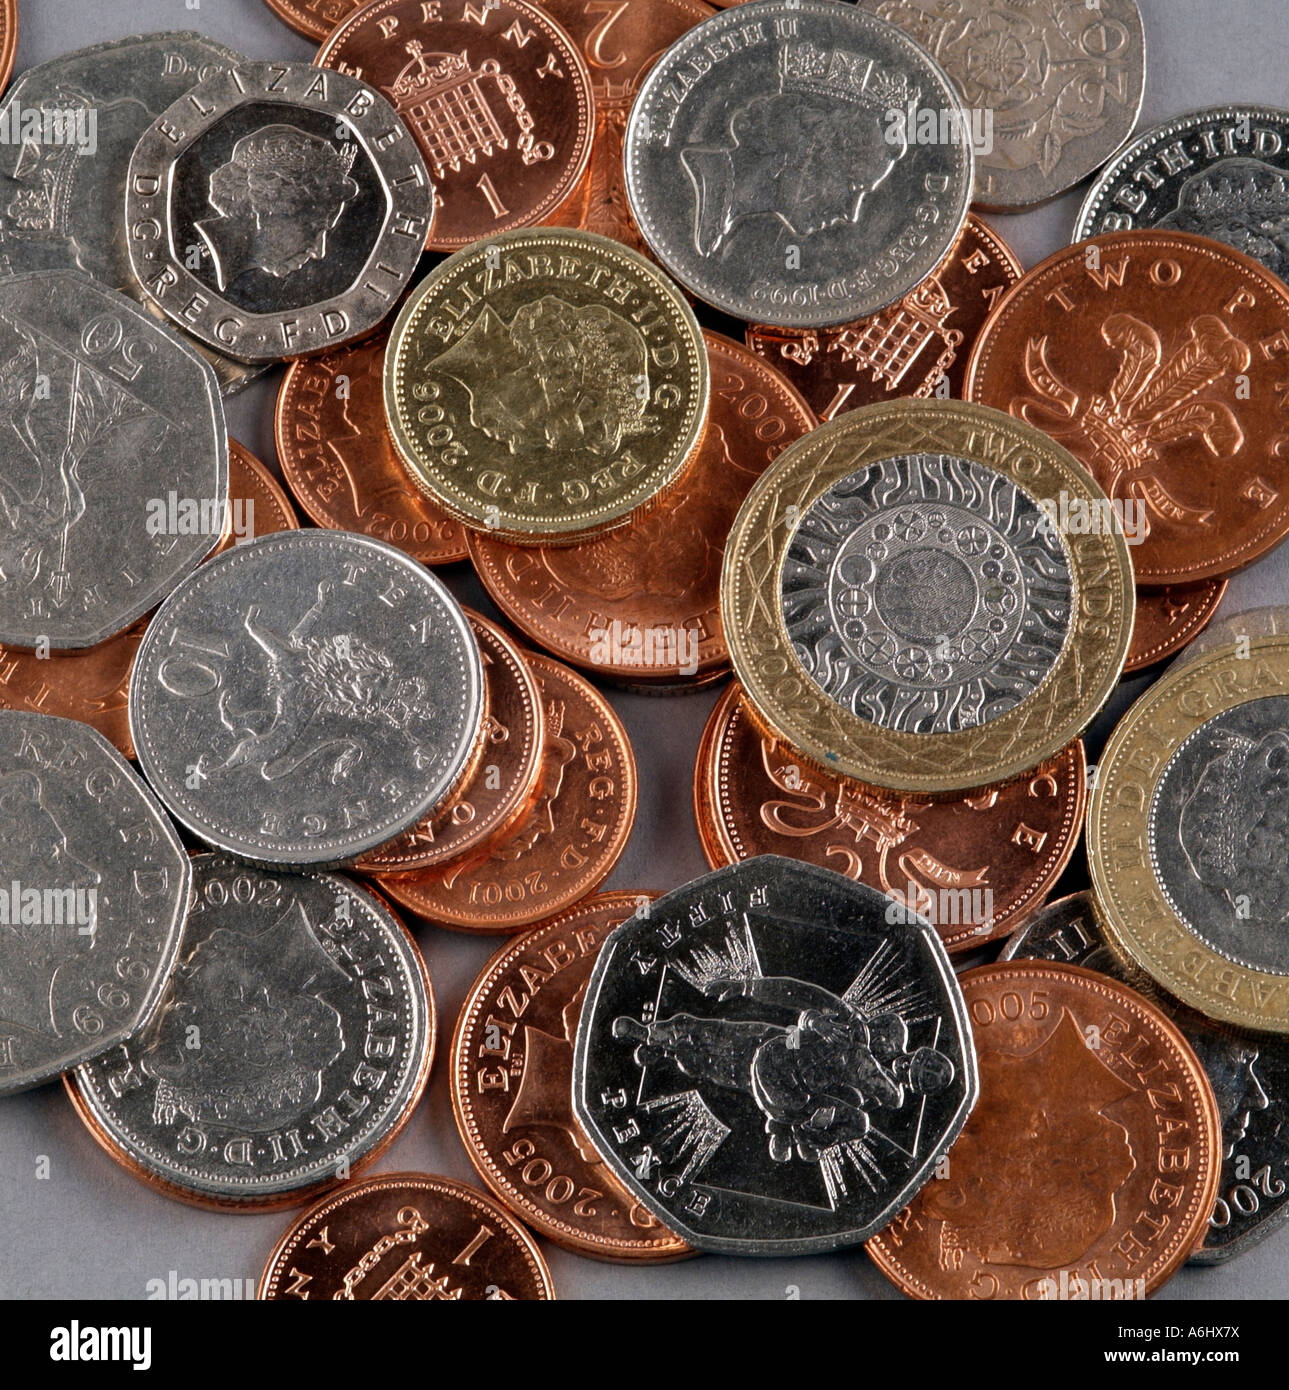 Money UK currency Coins Stock Photo